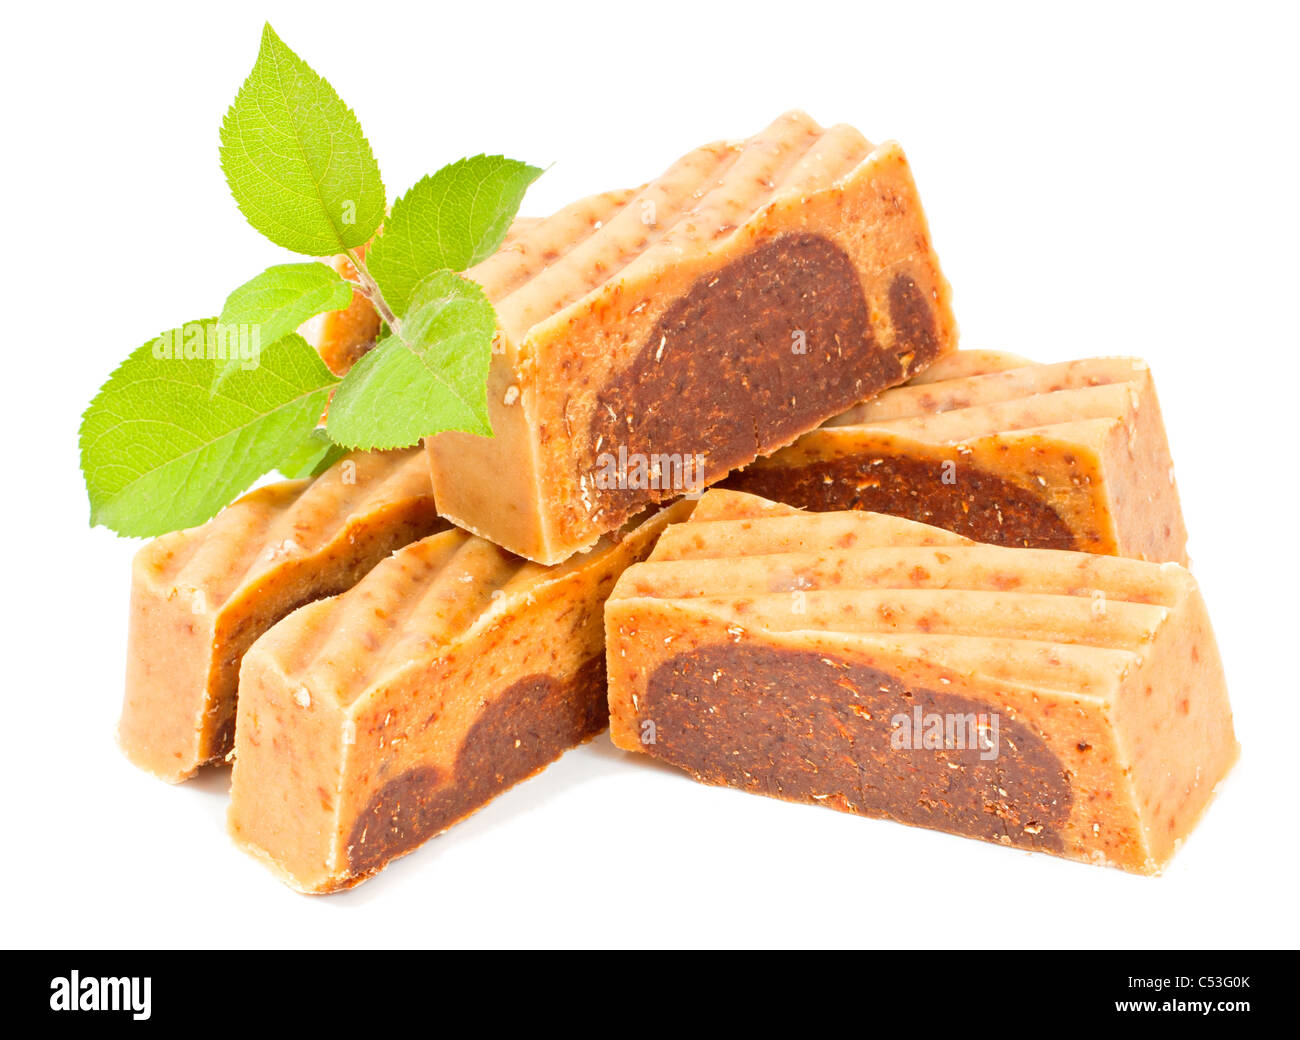 Handmade soap with green twig on white background. Stock Photo